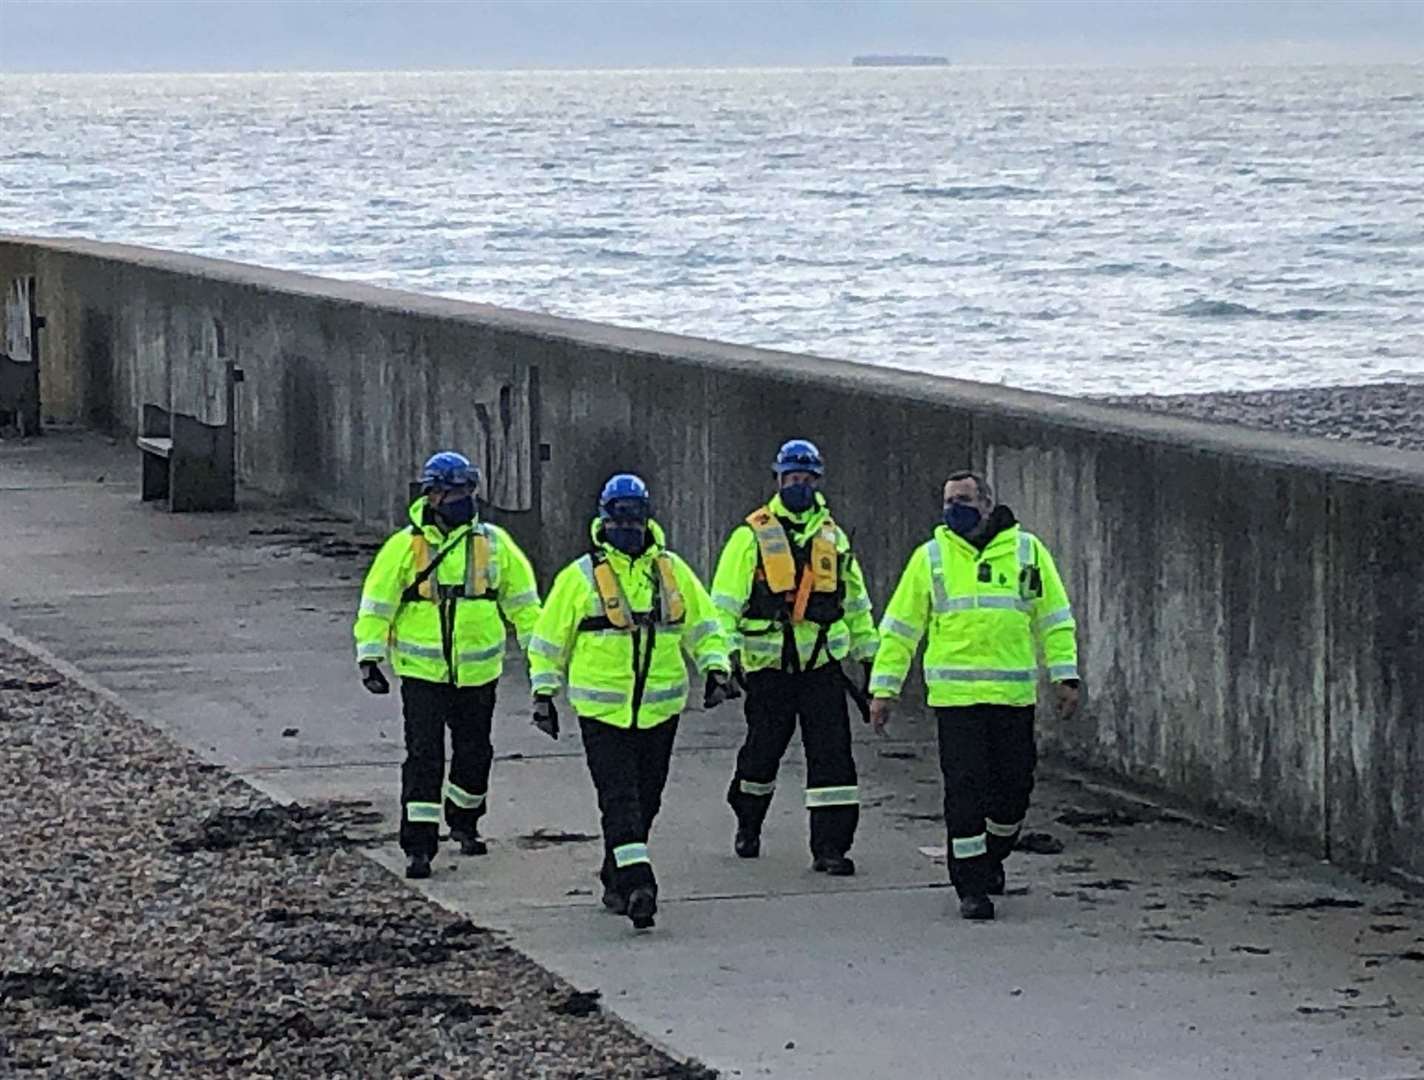 Coastguard crew are none the wiser after searching for the falling object